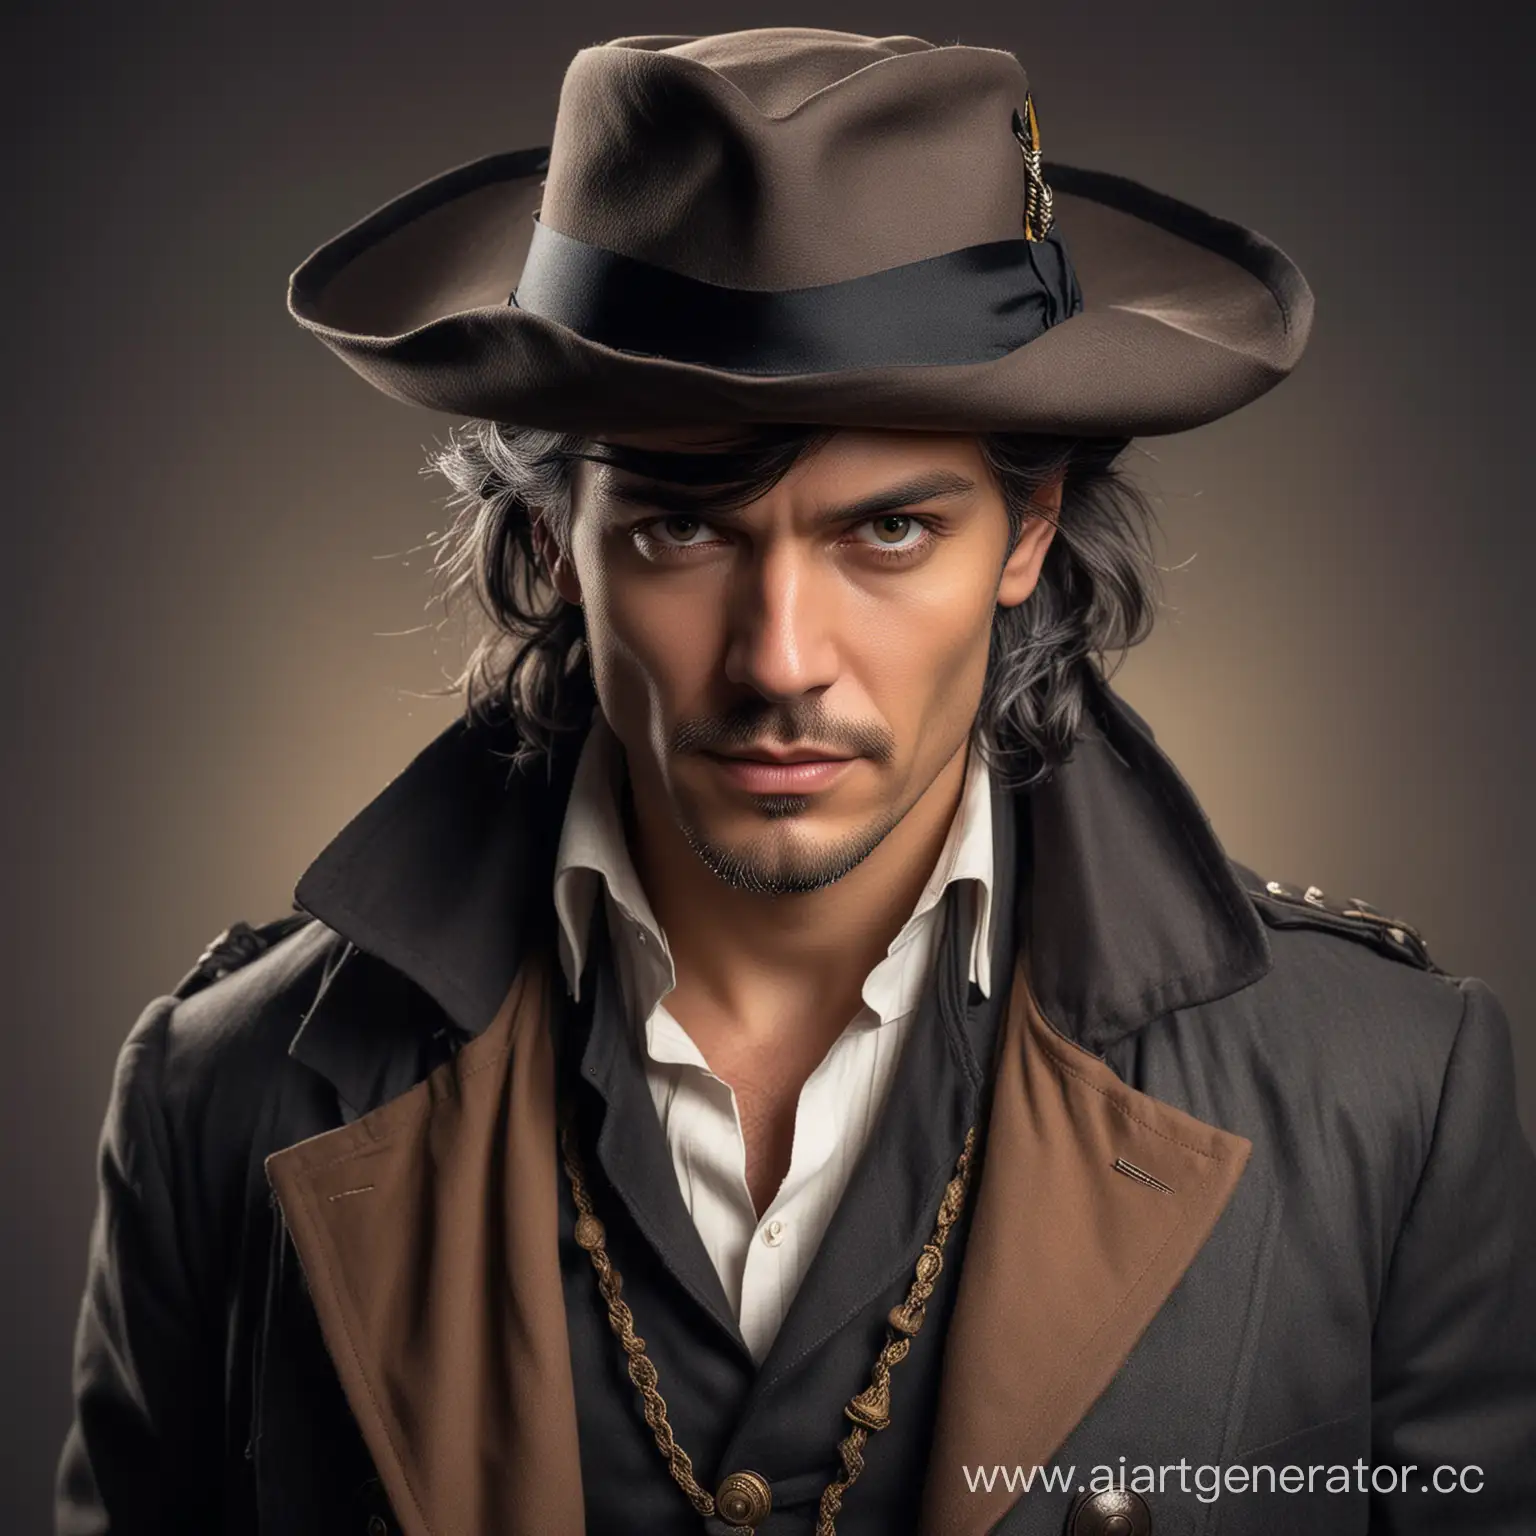 Luxurious-Pirate-Captain-with-Brown-Eyes-and-Fedora-Hat